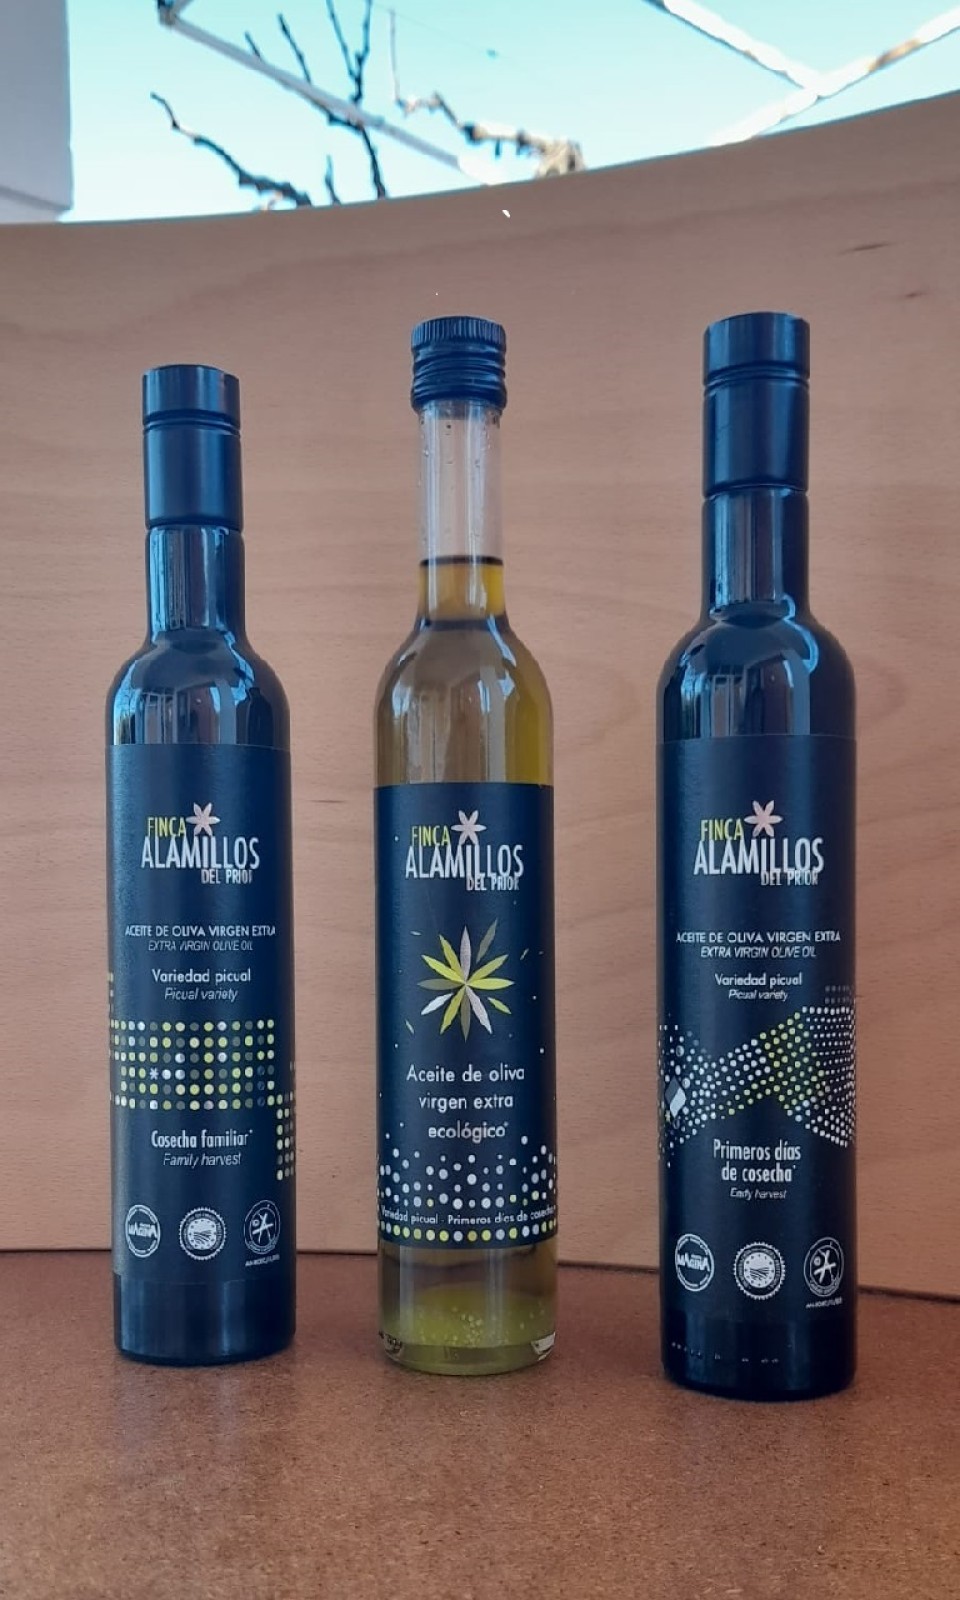 EUROPE. Pack of 3 assorted bottles of 500 ml (Family harvest, organic and Early harvest)